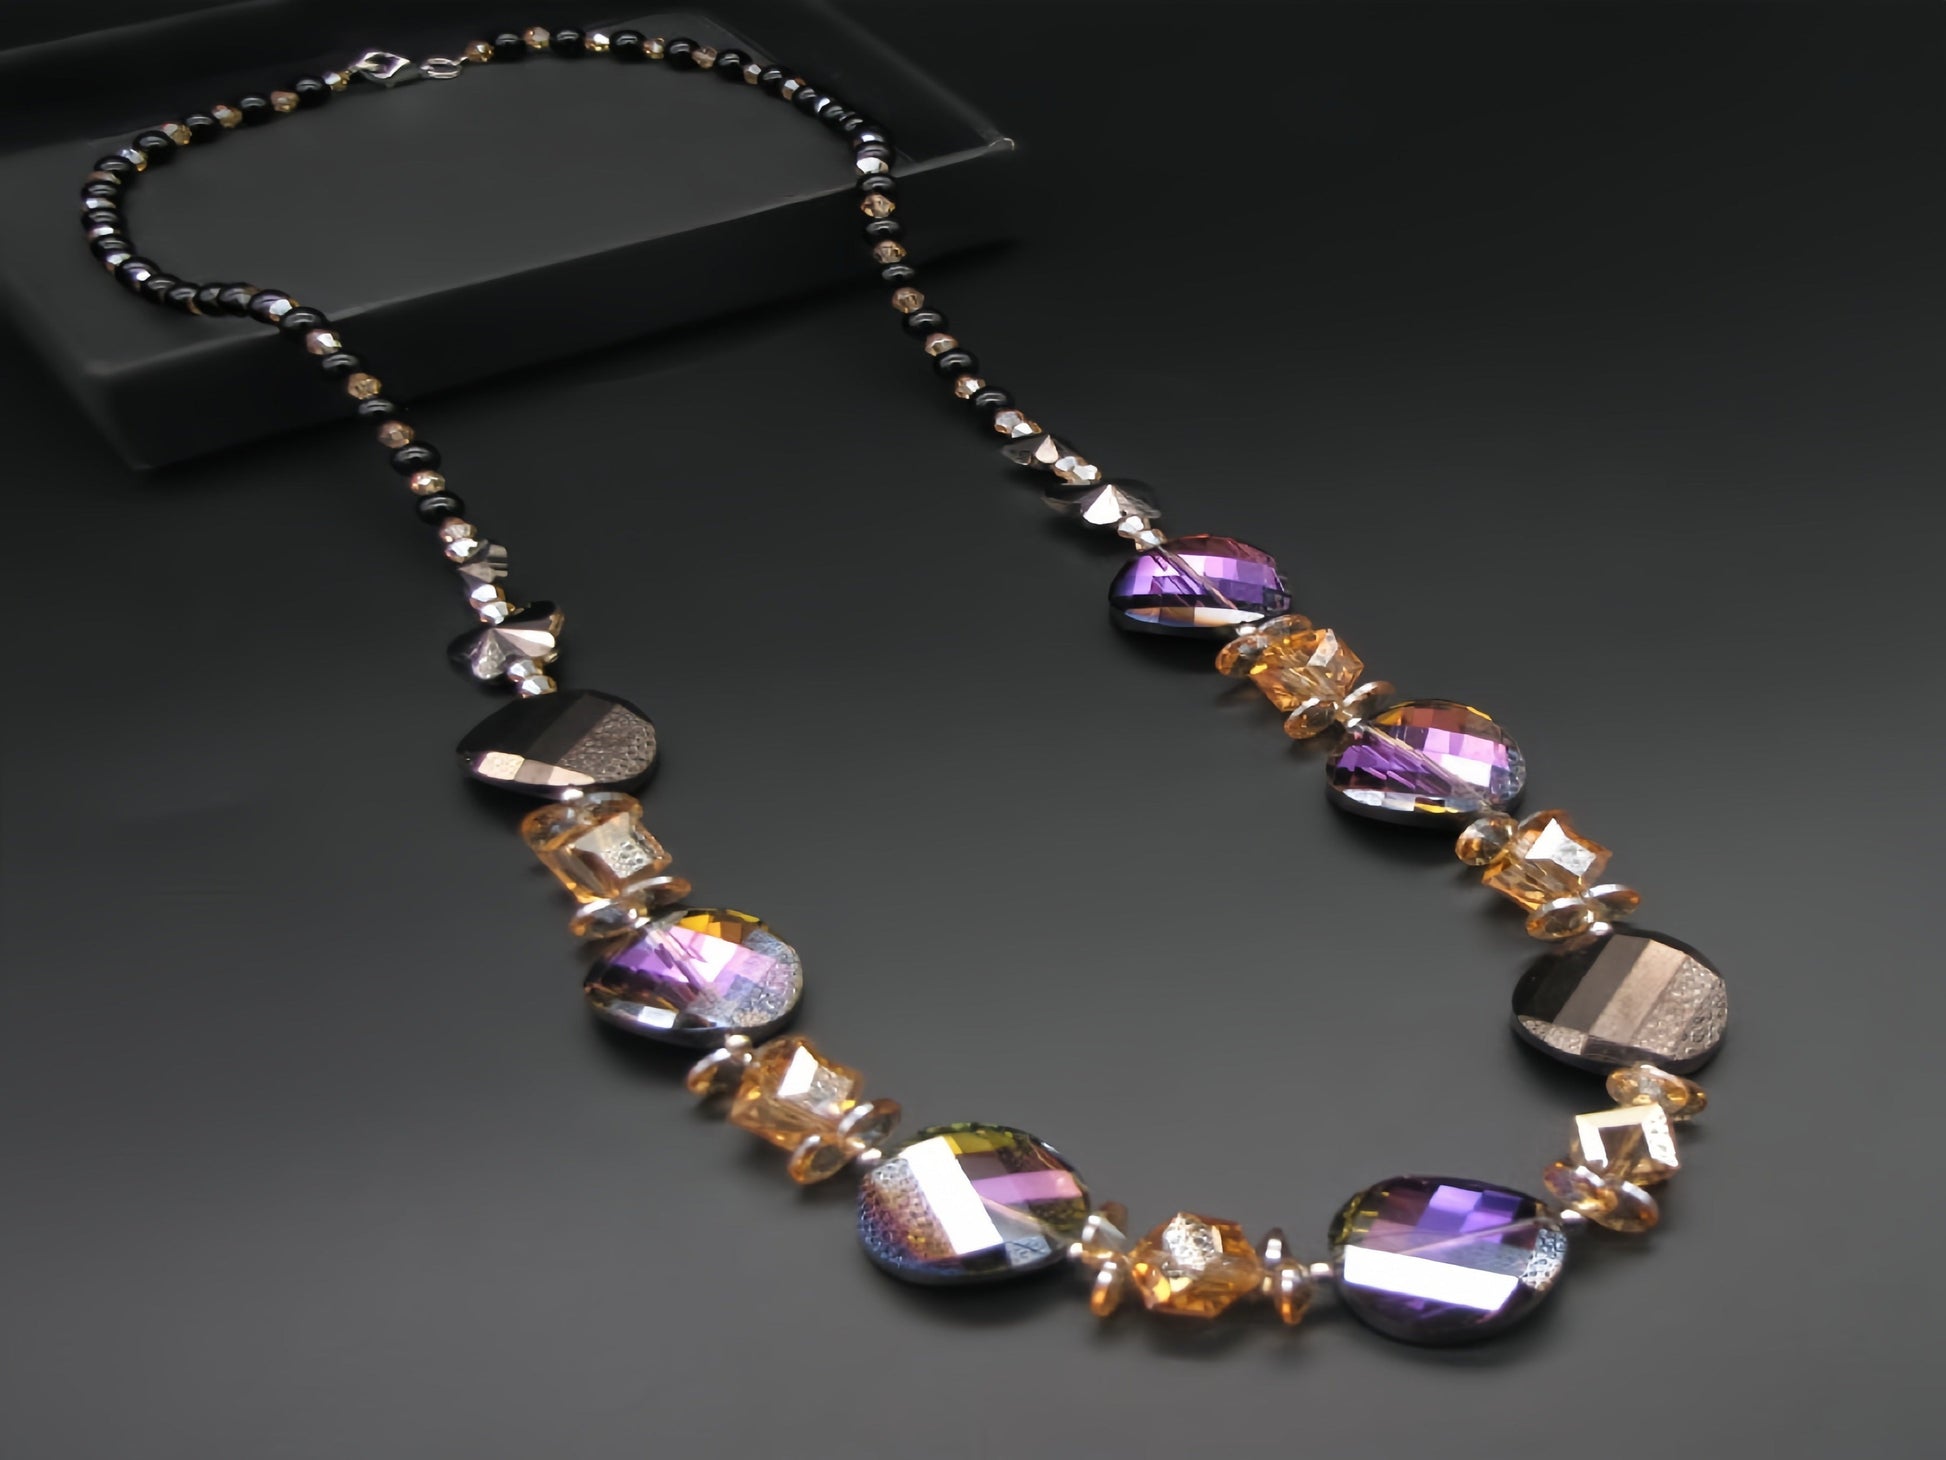 AB Crystal Versatile Handmade Necklace Necklace from SHOPQAQ